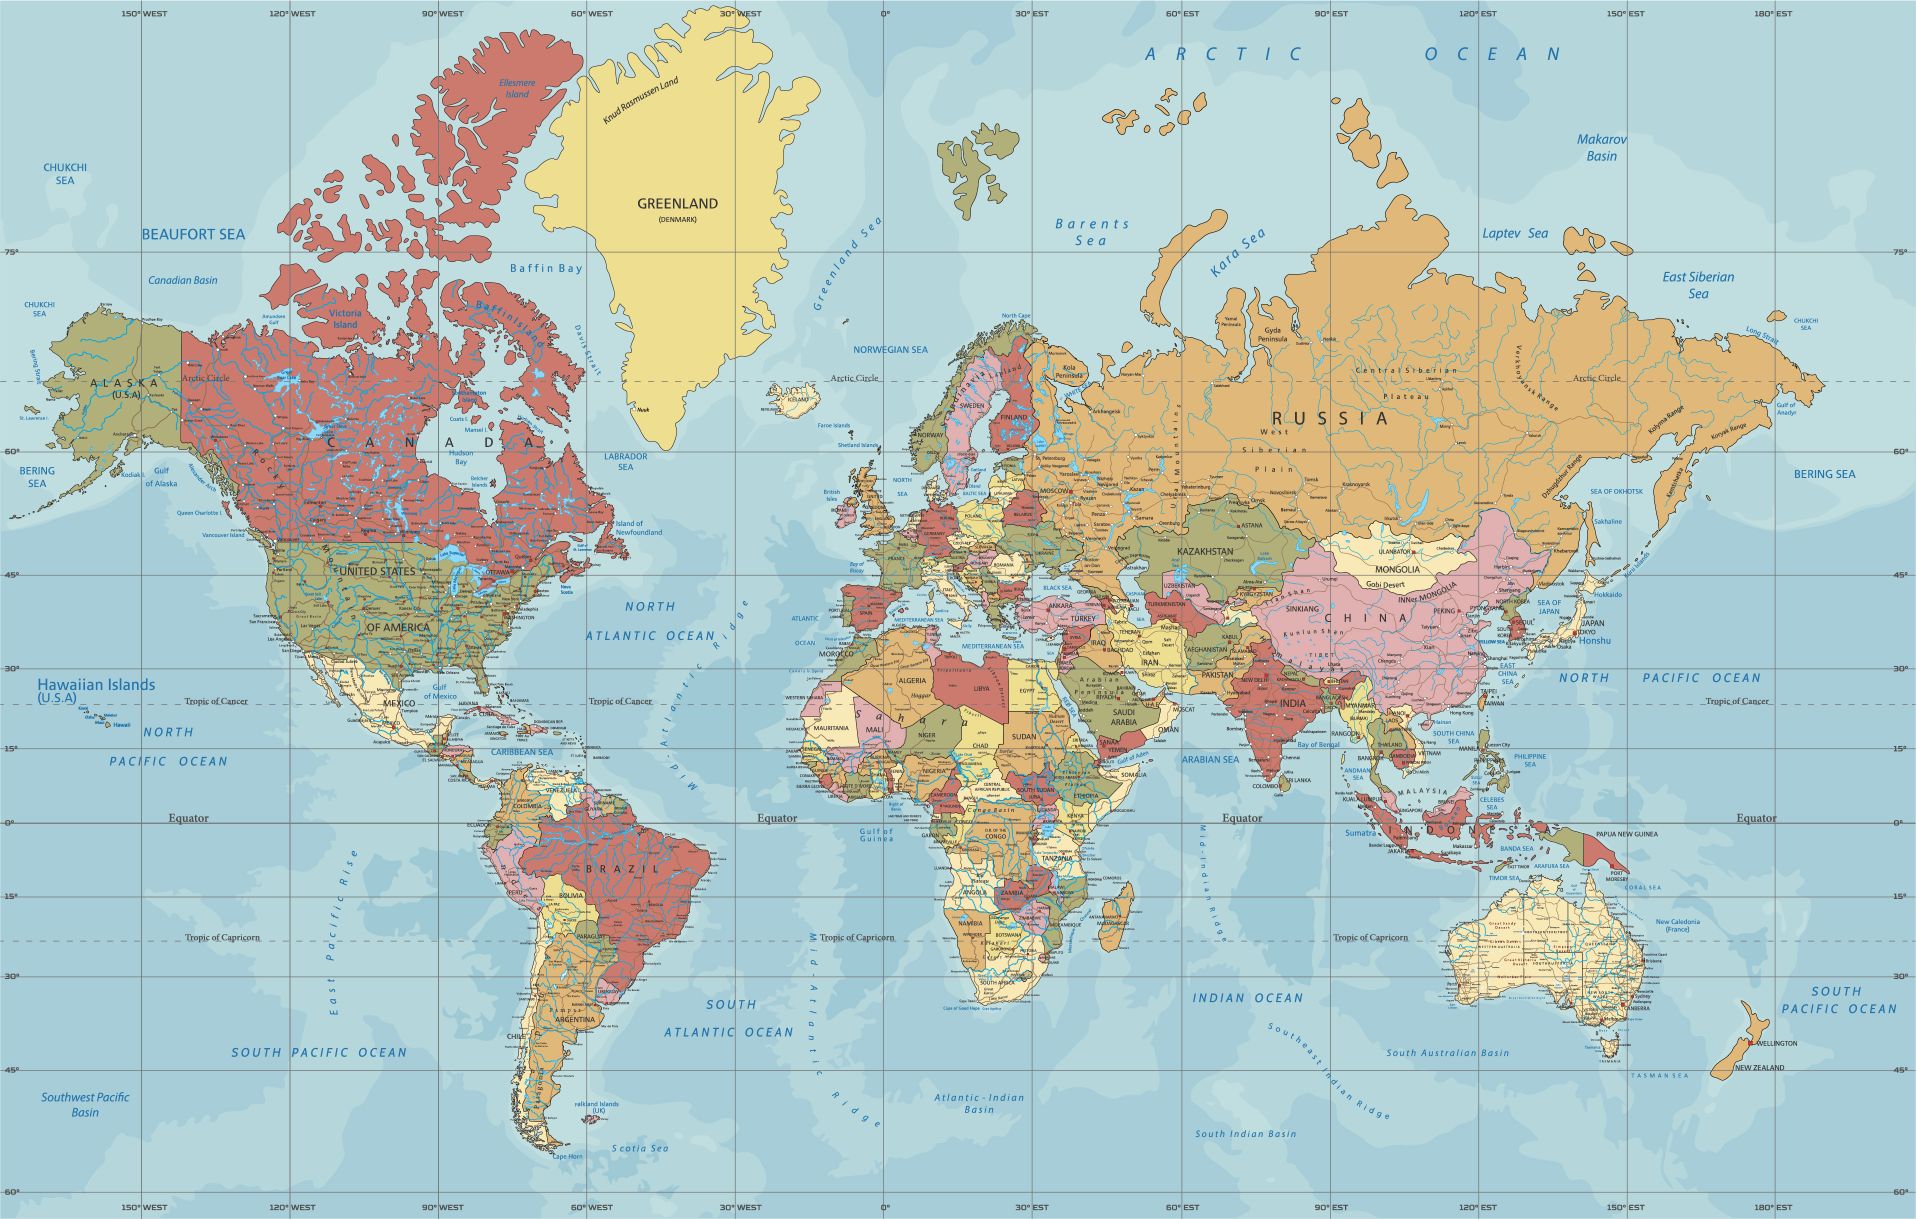 The Mercator Projection map of the world